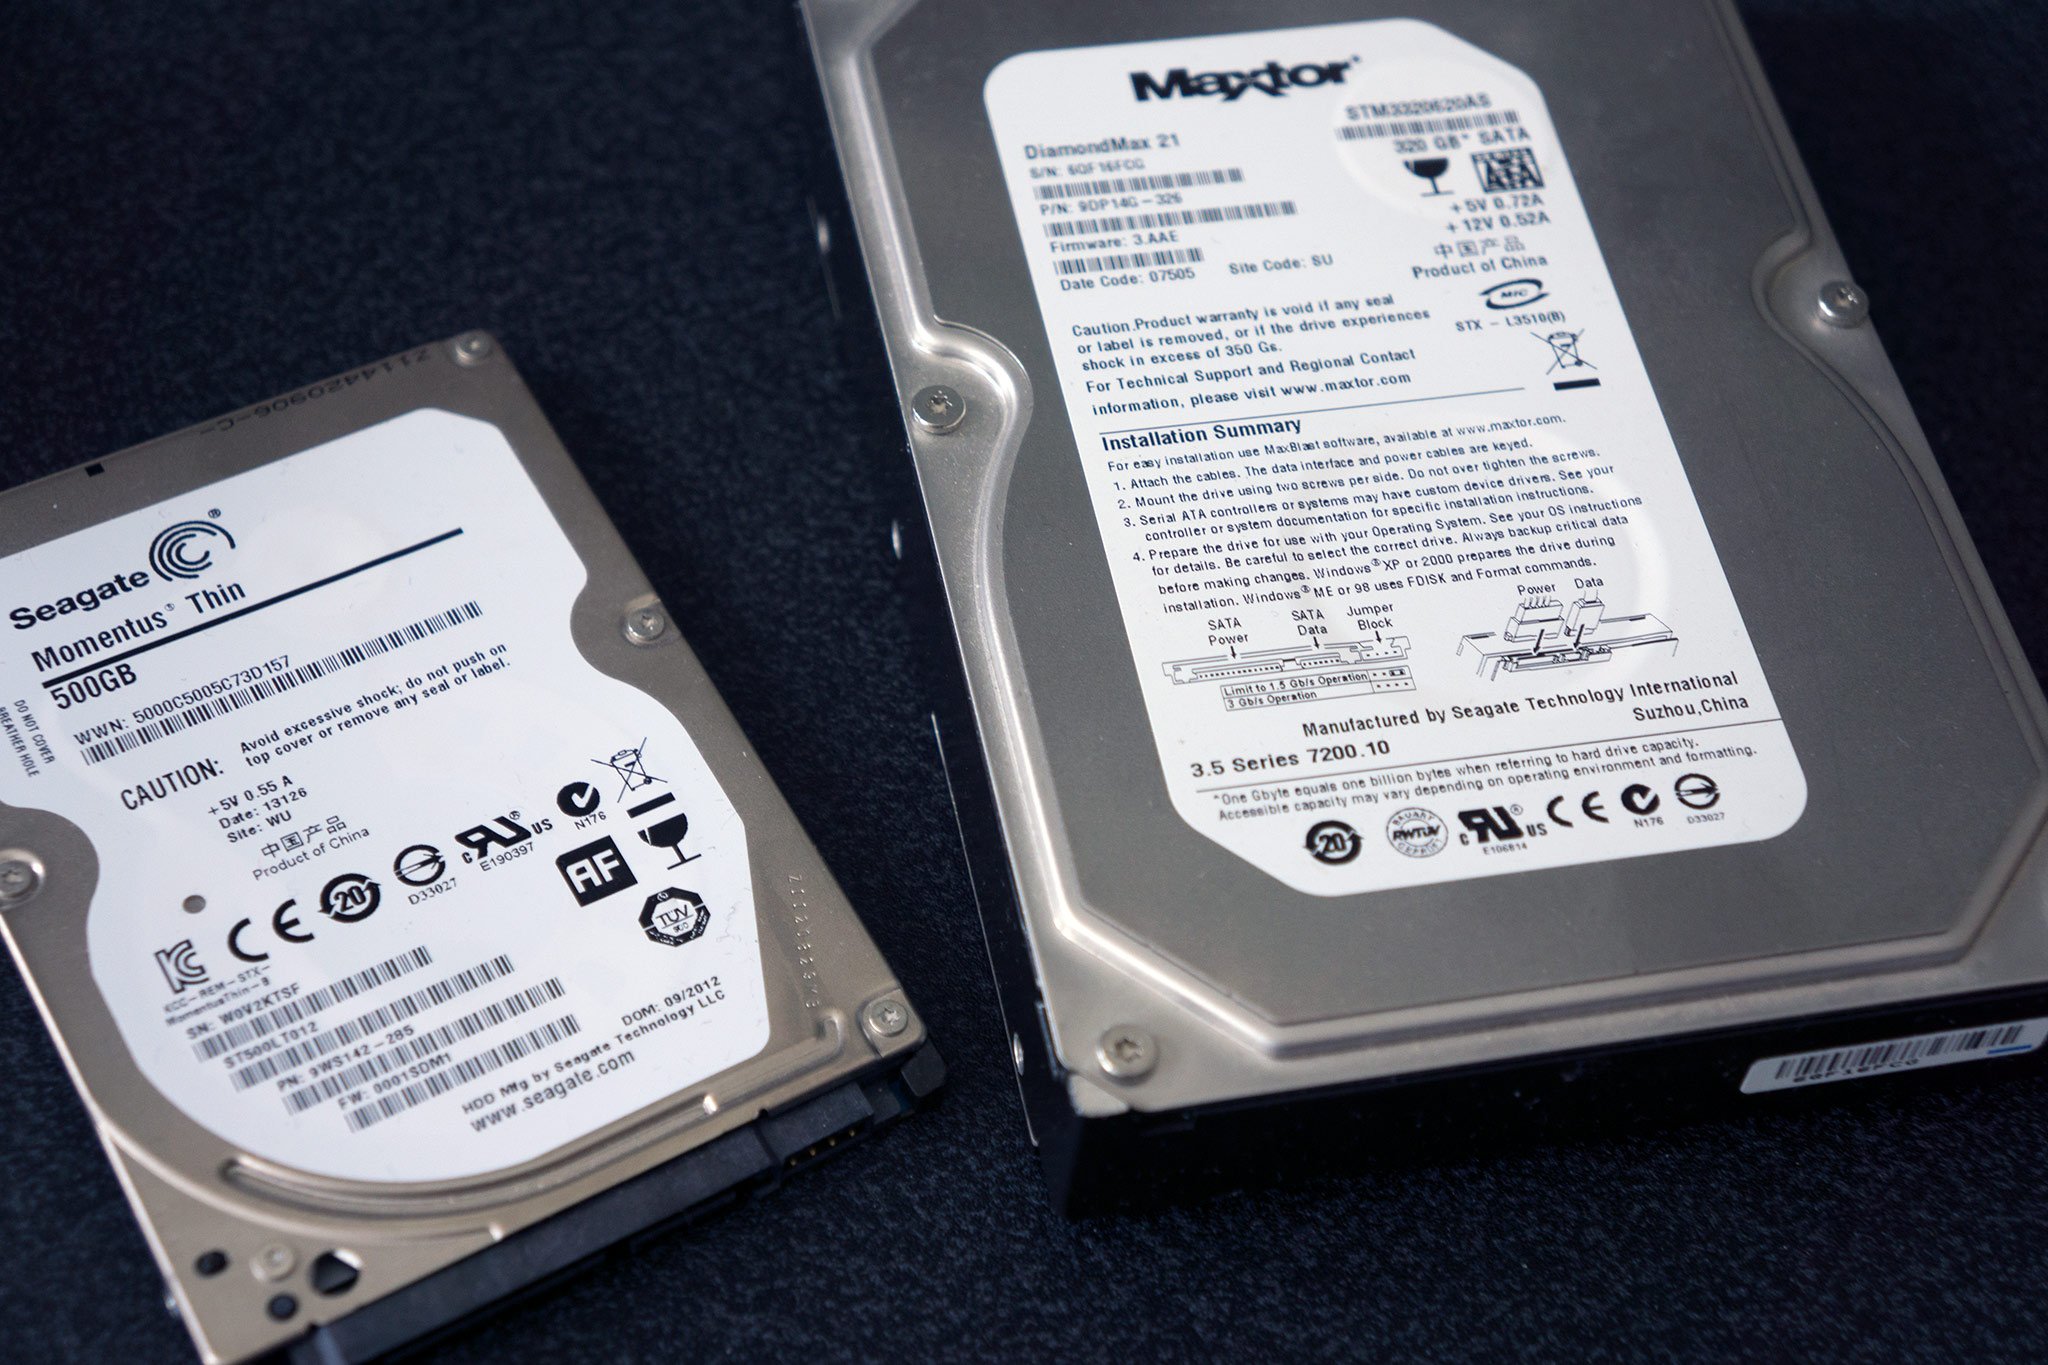 Don't throw away mechanical hard drives! Re-use them to expand PC